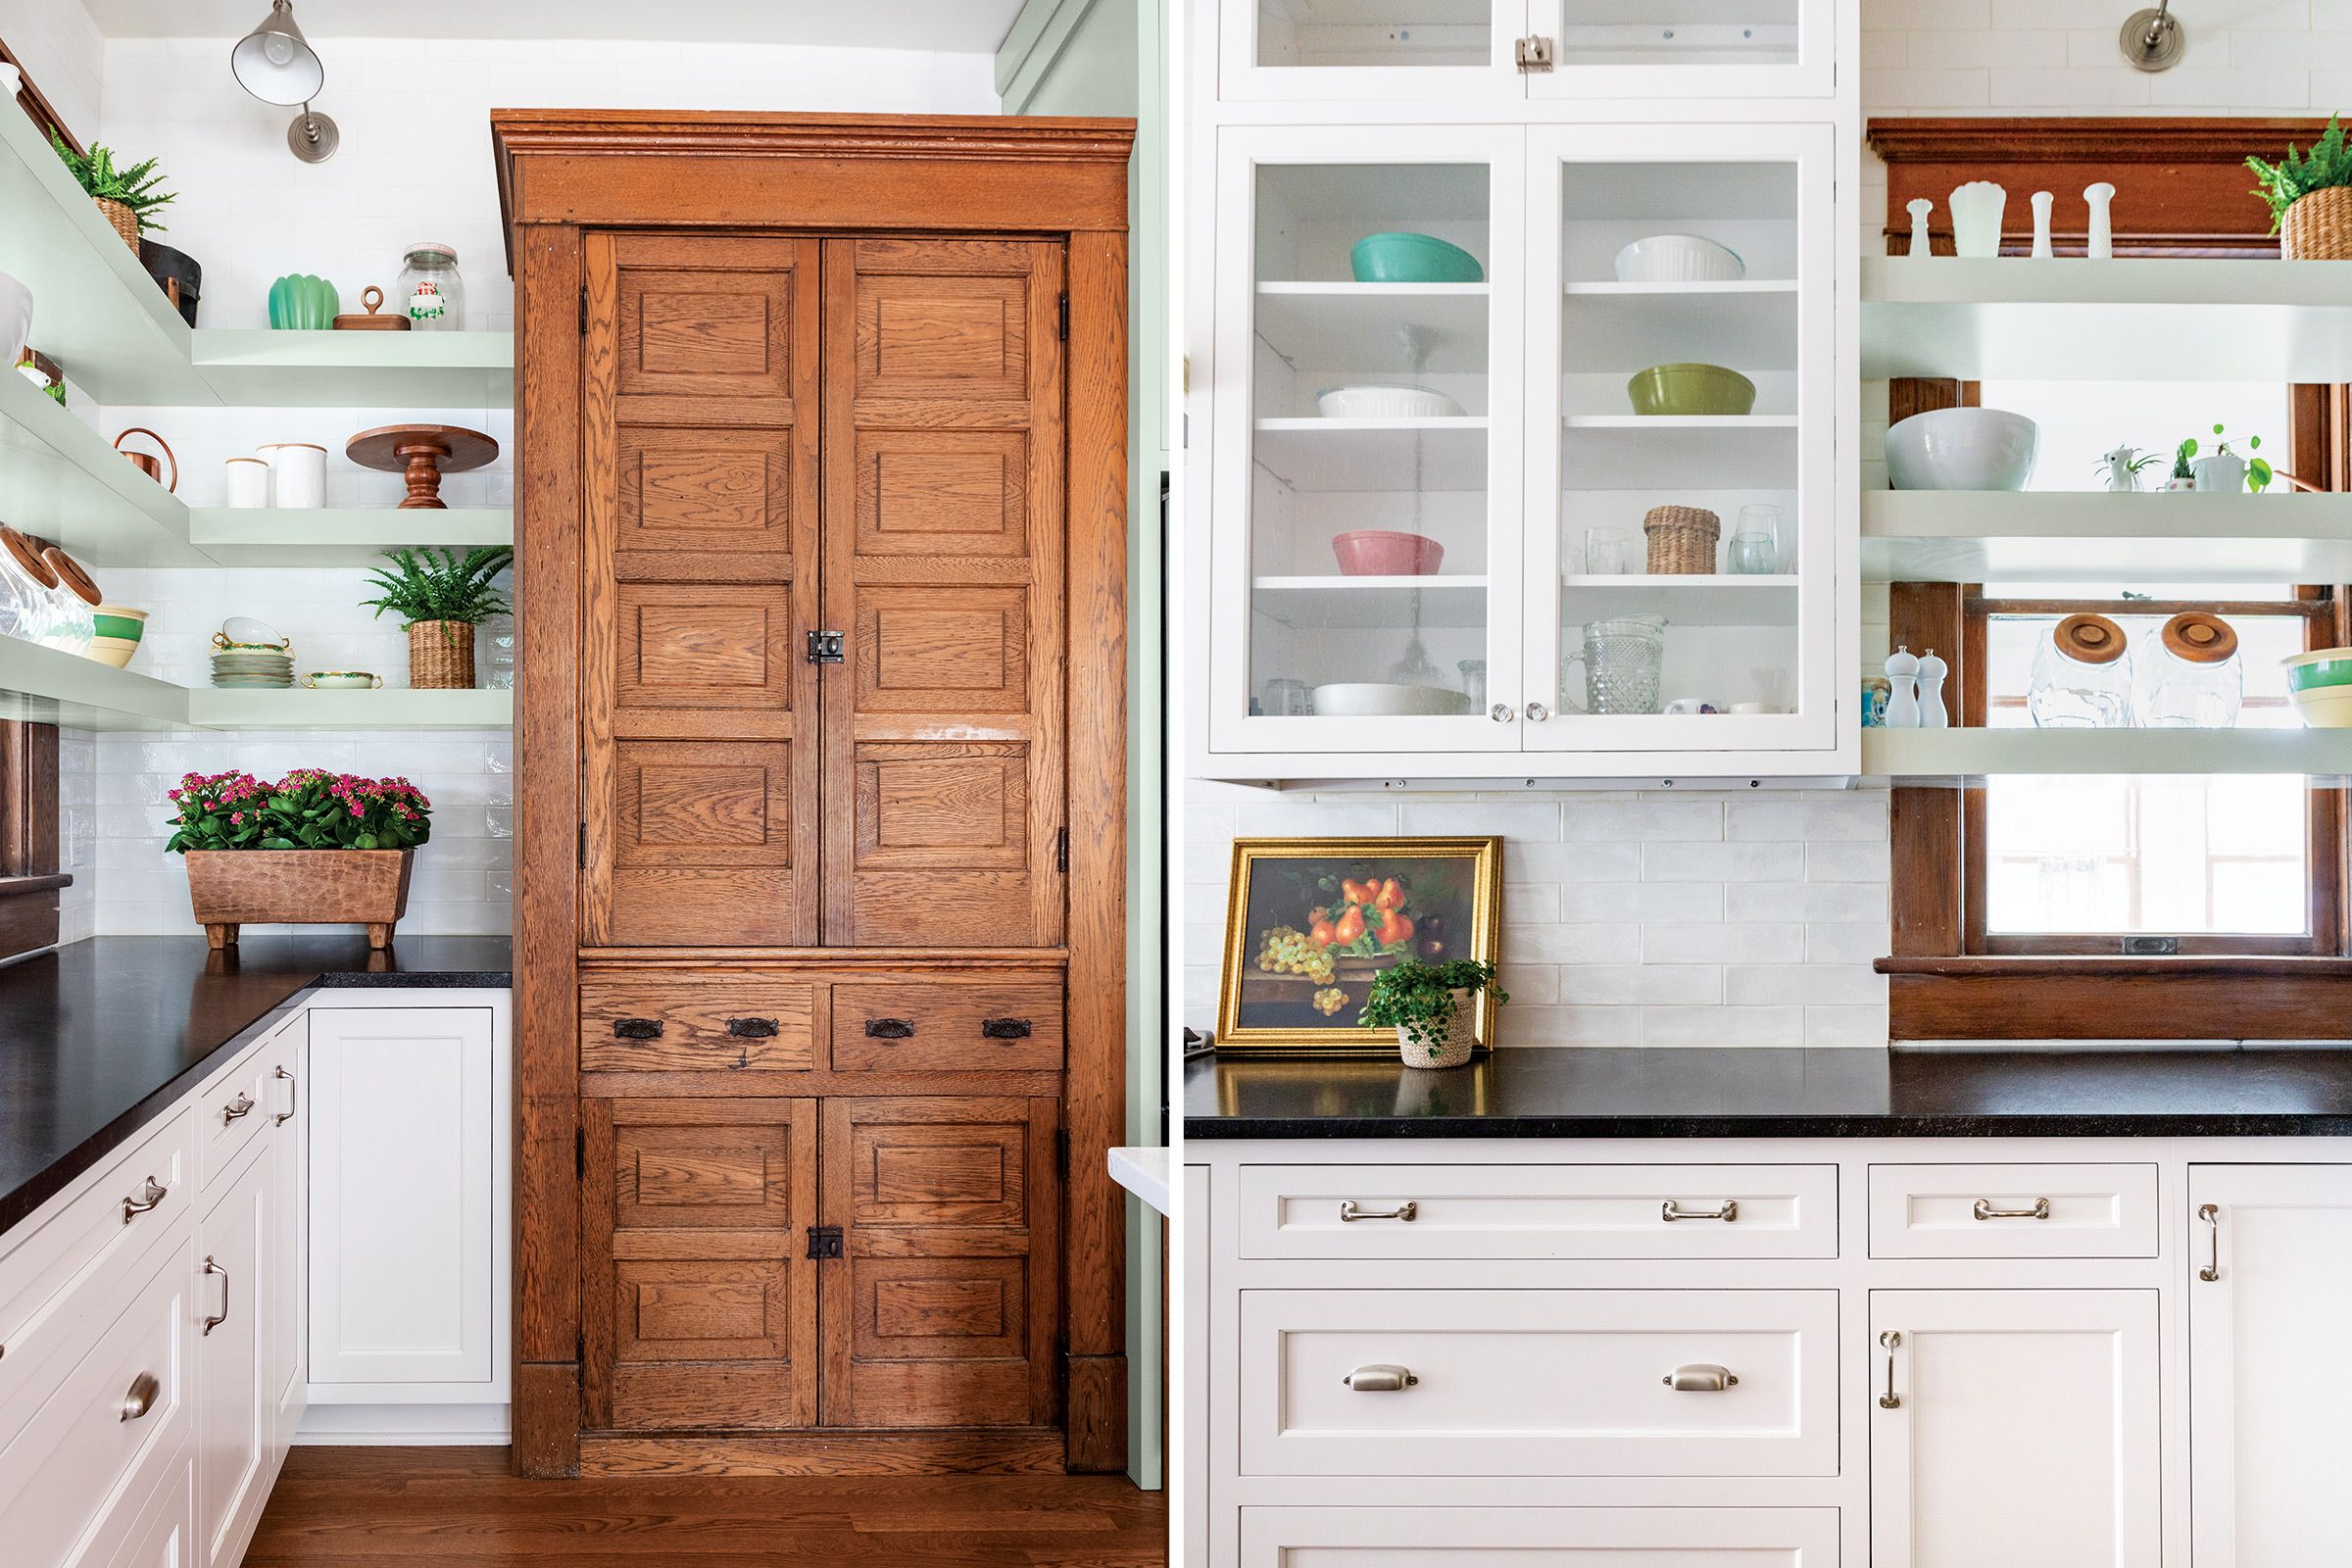 https://s42814.pcdn.co/wp-content/uploads/2022/08/web_hutch_and_cabinets_kitchen_remodel_2_up.jpg.optimal.jpg